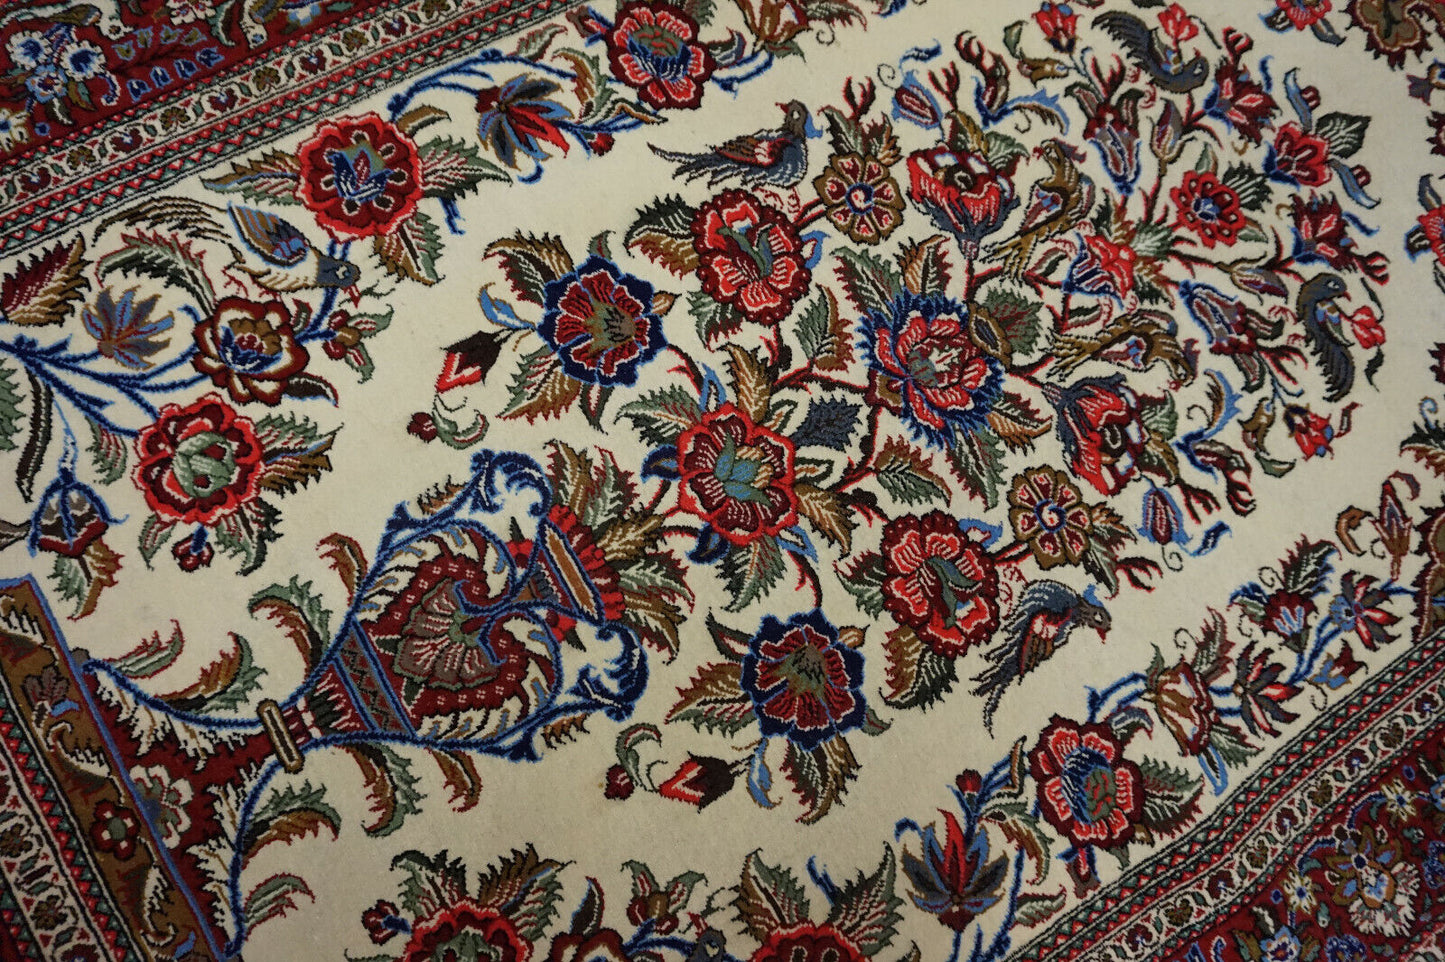 Green floral patterns enhancing the elegance of the Persian Rug